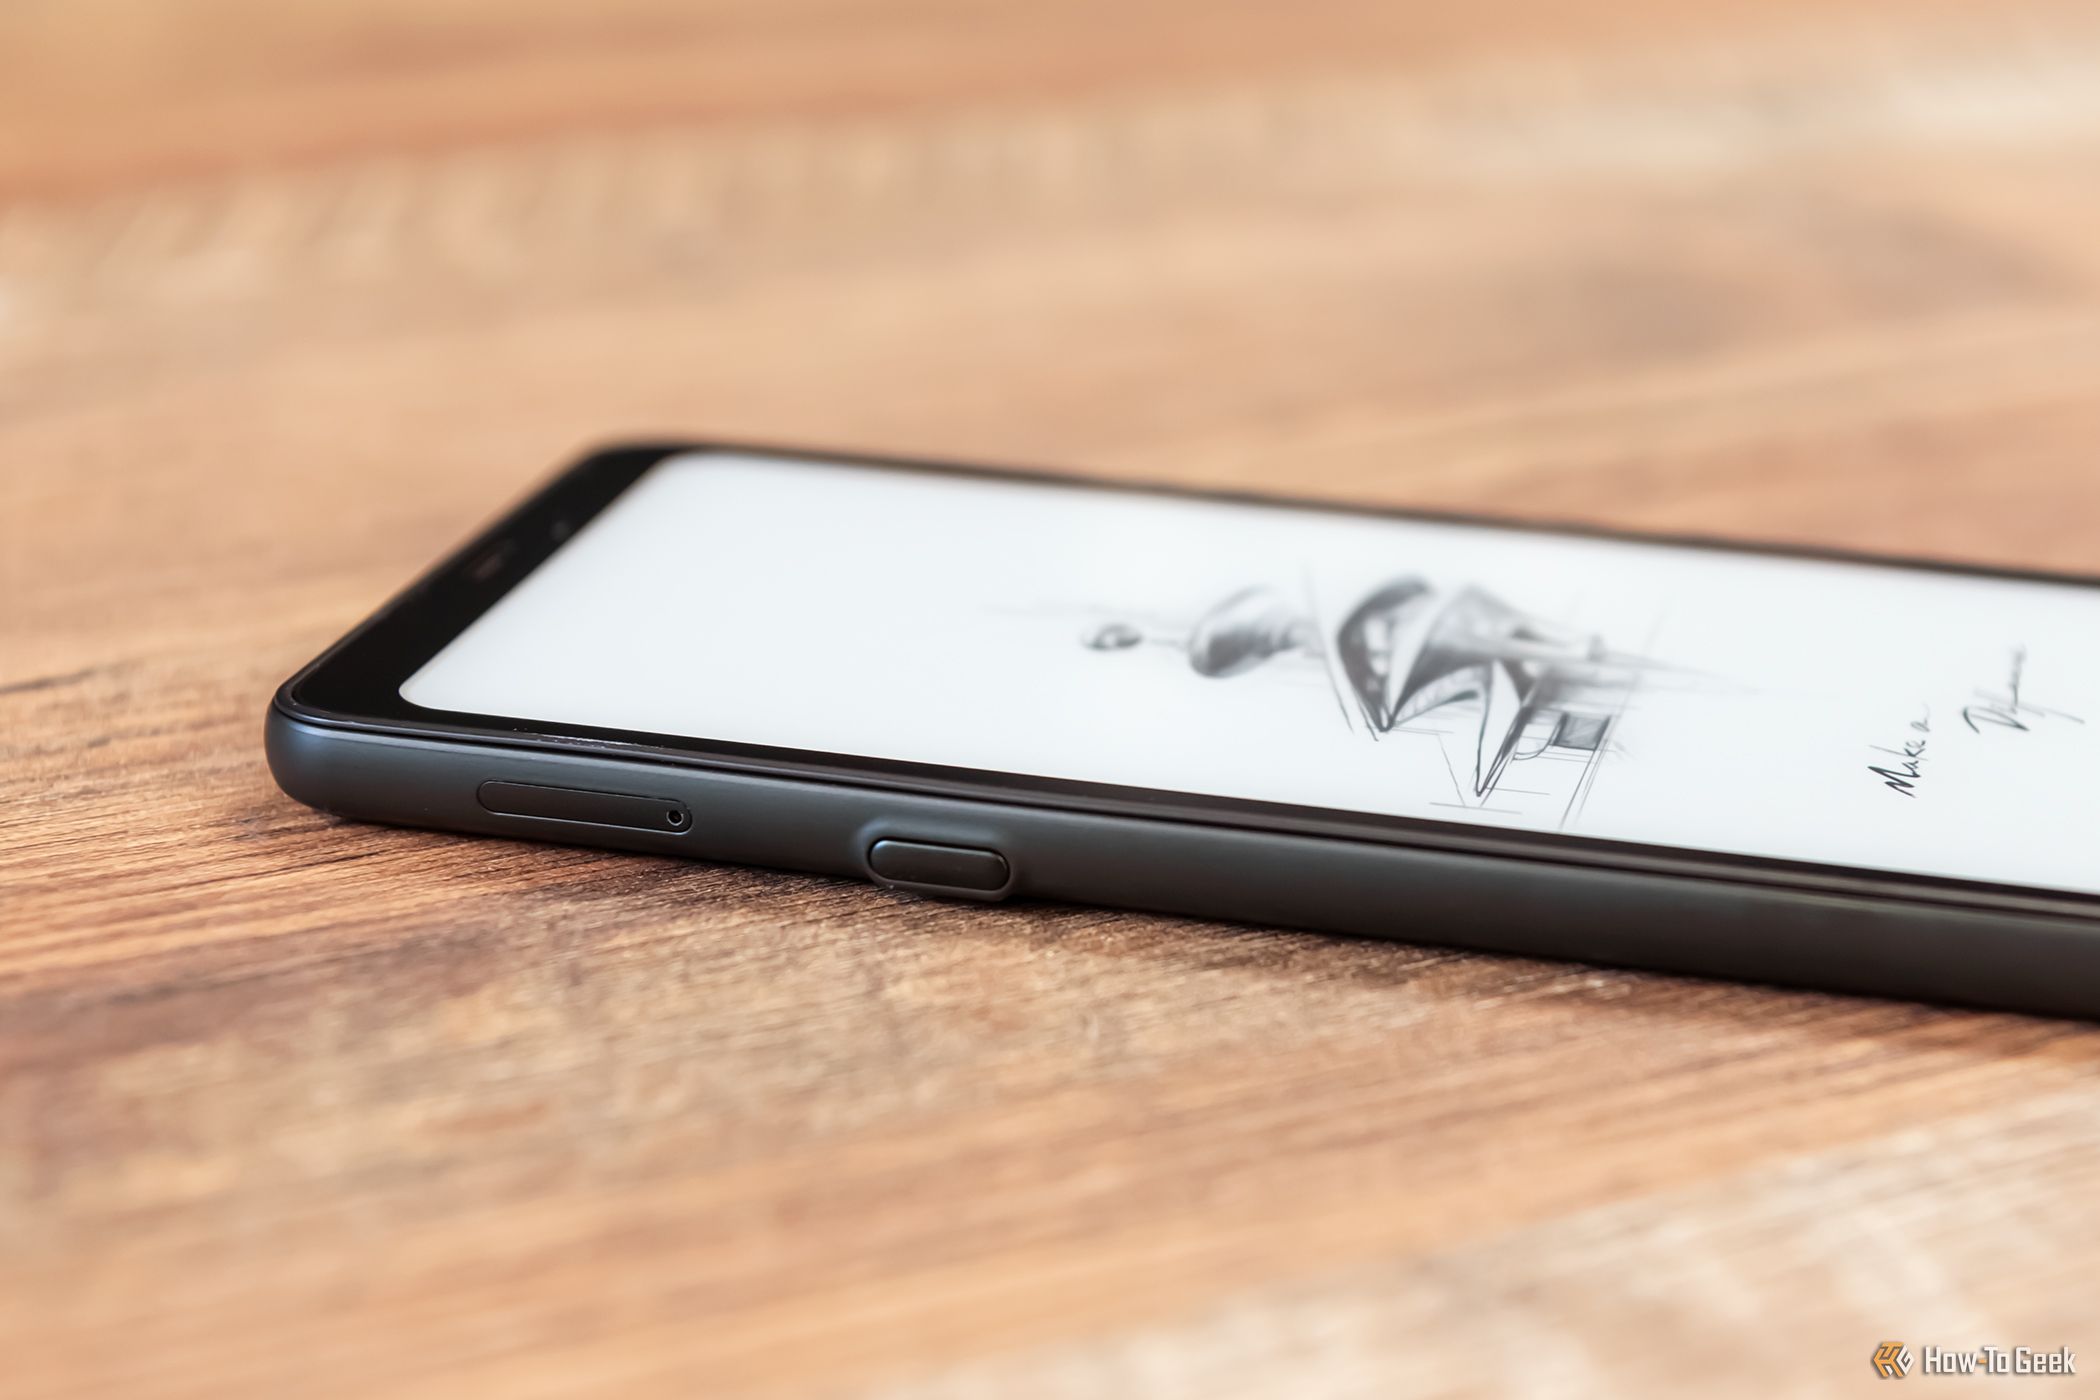 Why I Want an E-Ink Smartphone